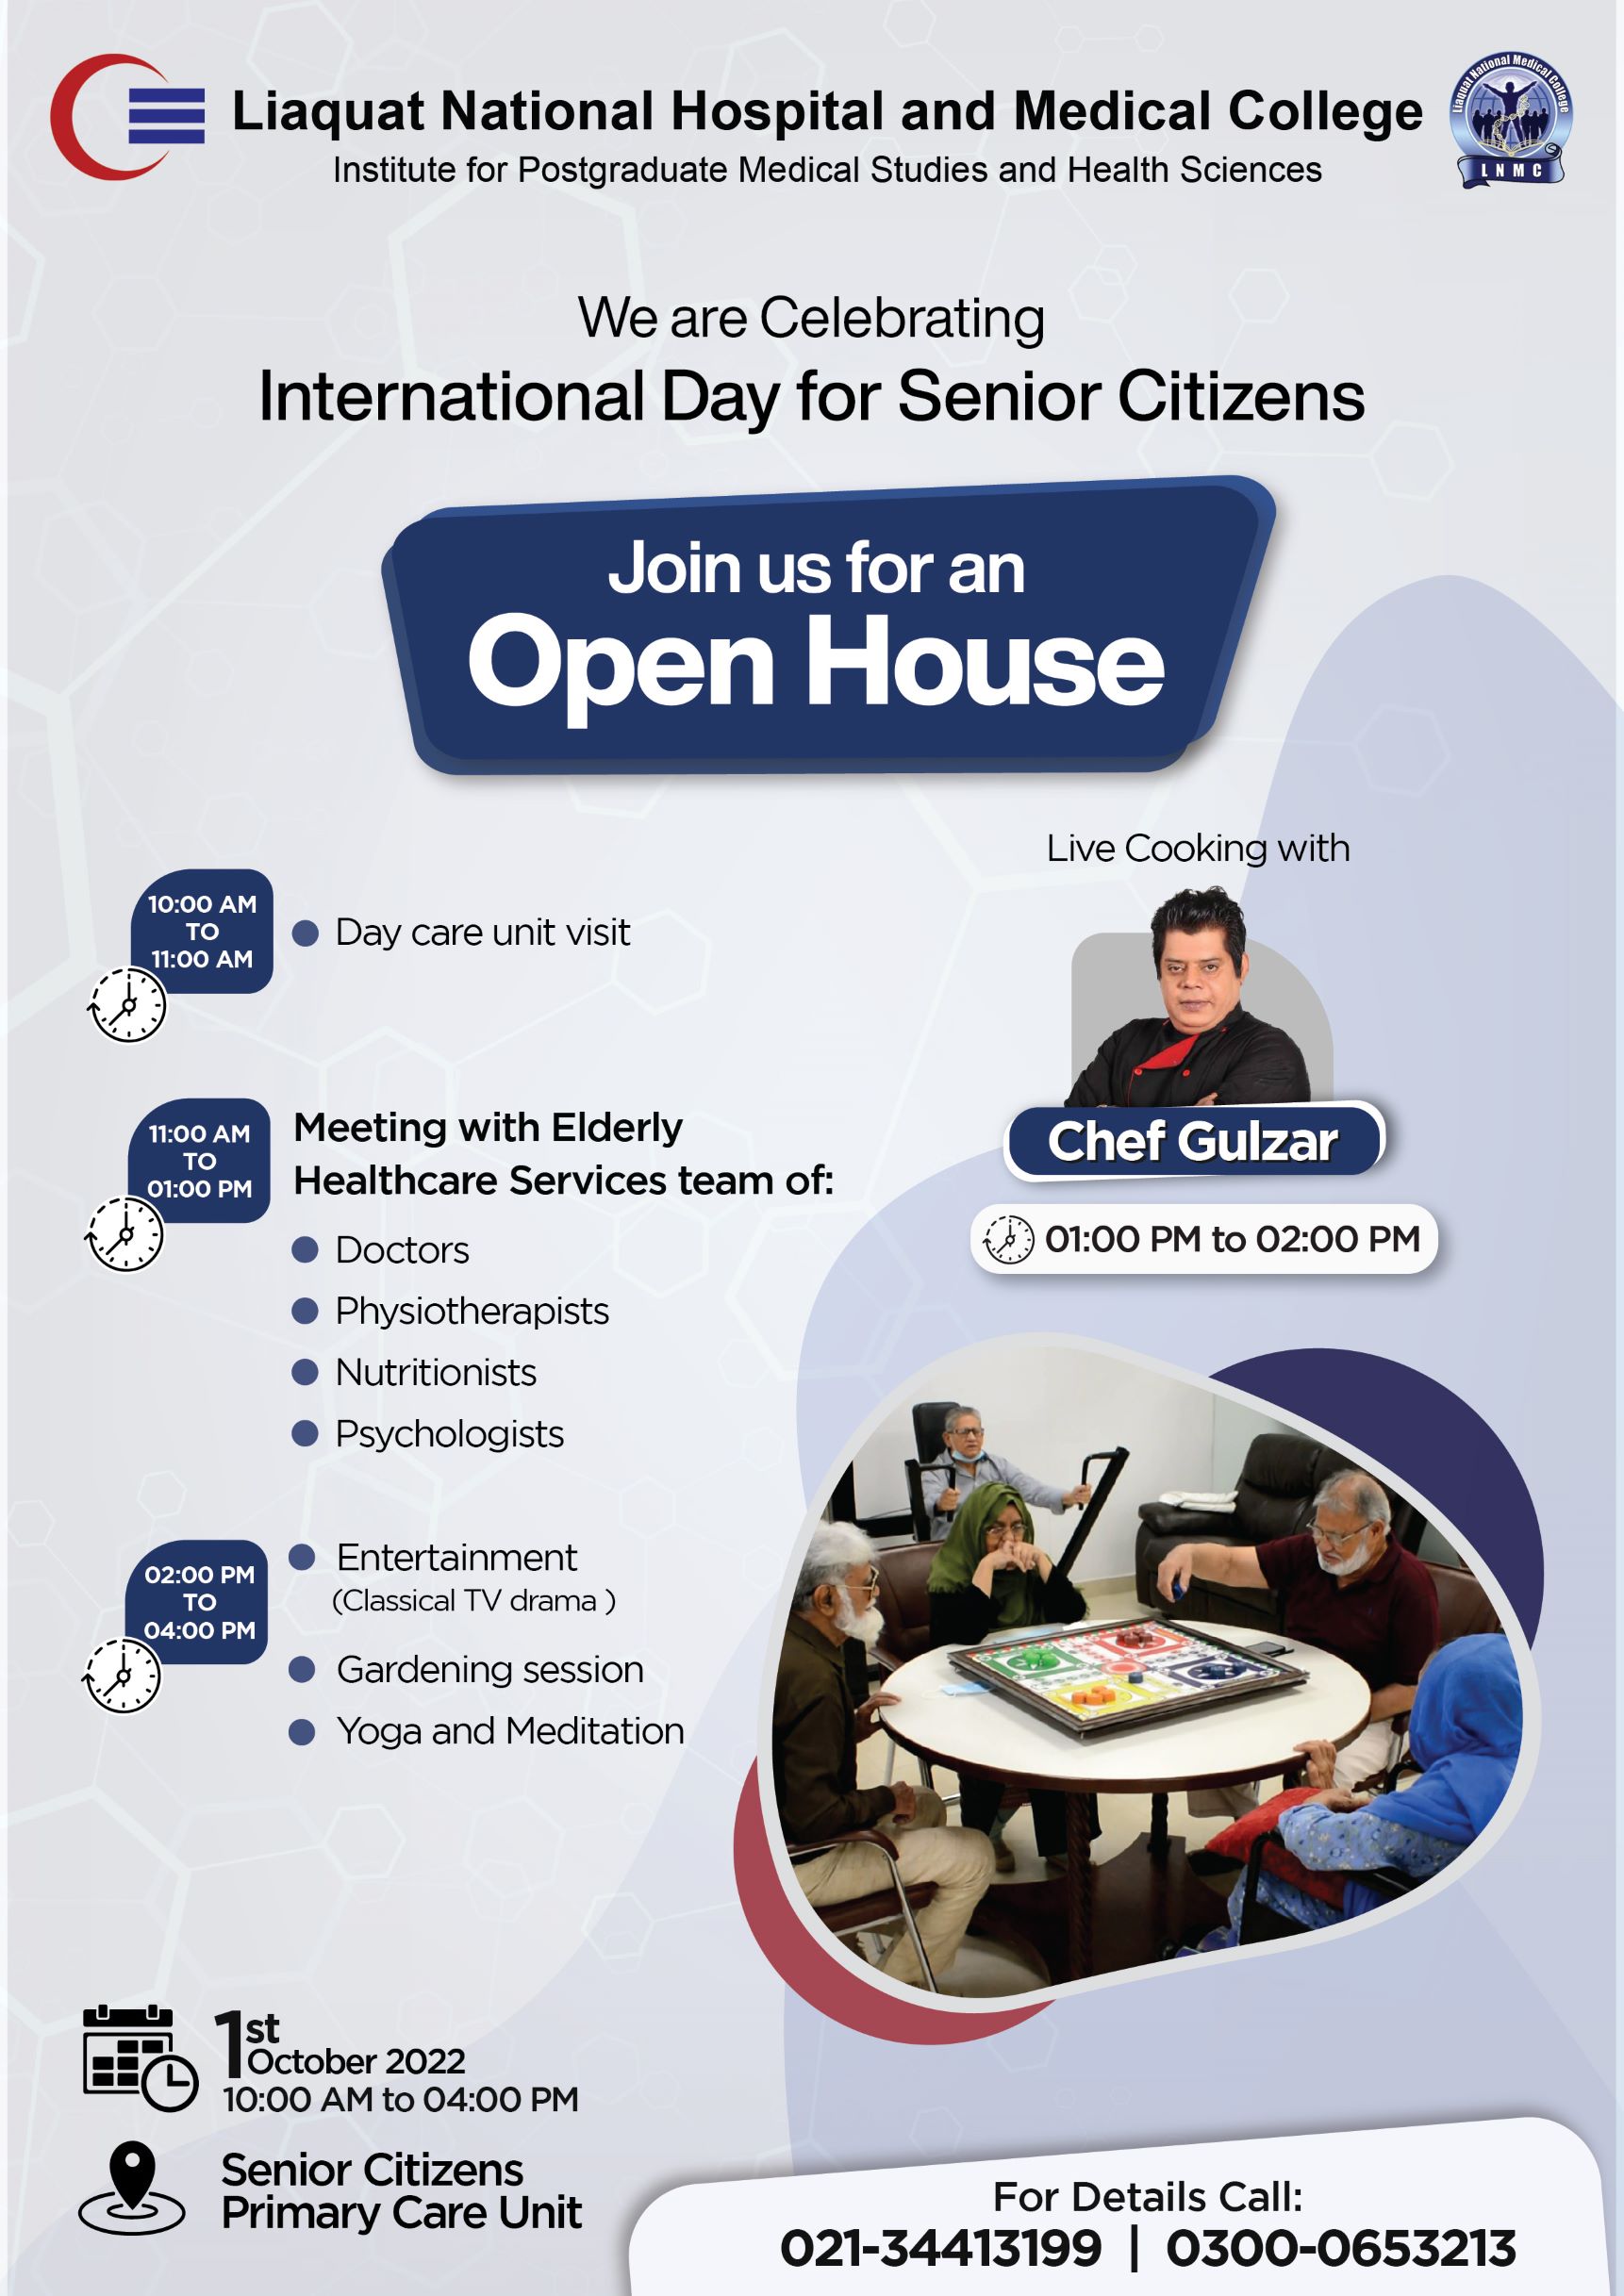 Join us for an OPEN HOUSE on Oct 1, 2022